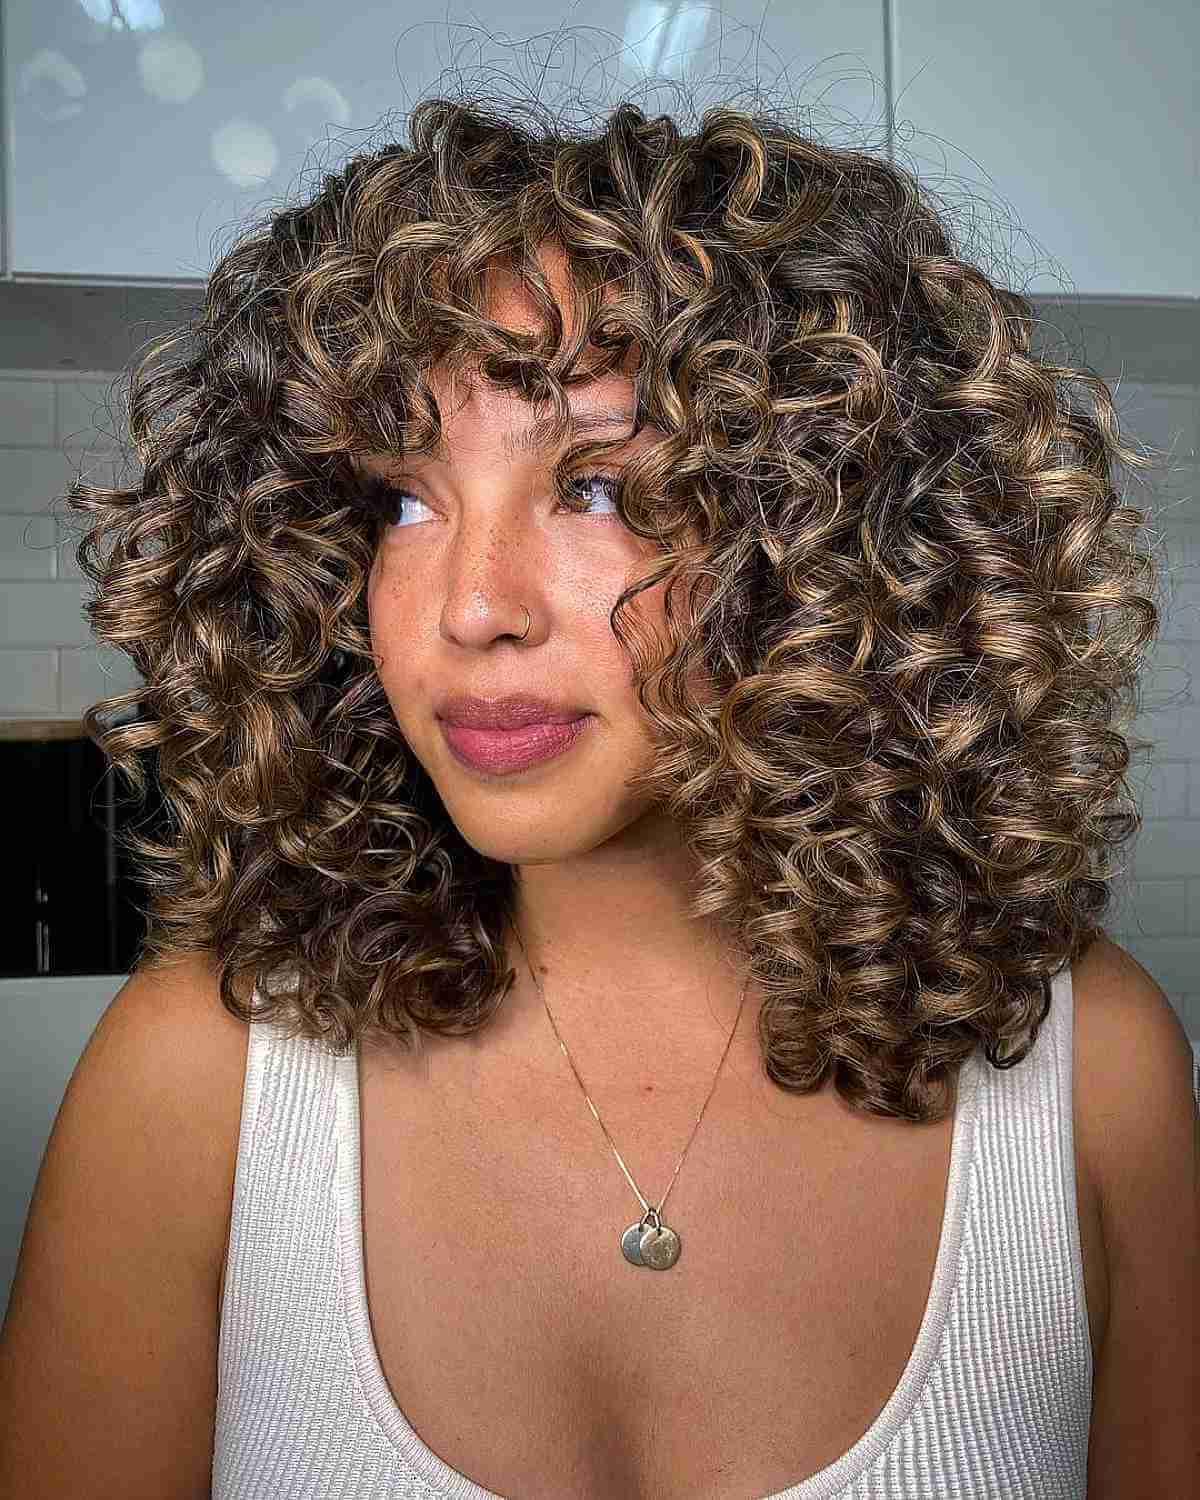 Beauty Therapy - Beautiful caramel highlights on curly hair ! 💛  #curlyhighlights #curls #curlytherapy #curlyhaircut #colochos #rizos  #beautytherapy #curlspecialist #curlyhaircolor #curlyhairproducts  #healthycurls #naturalcurls #curly | Facebook